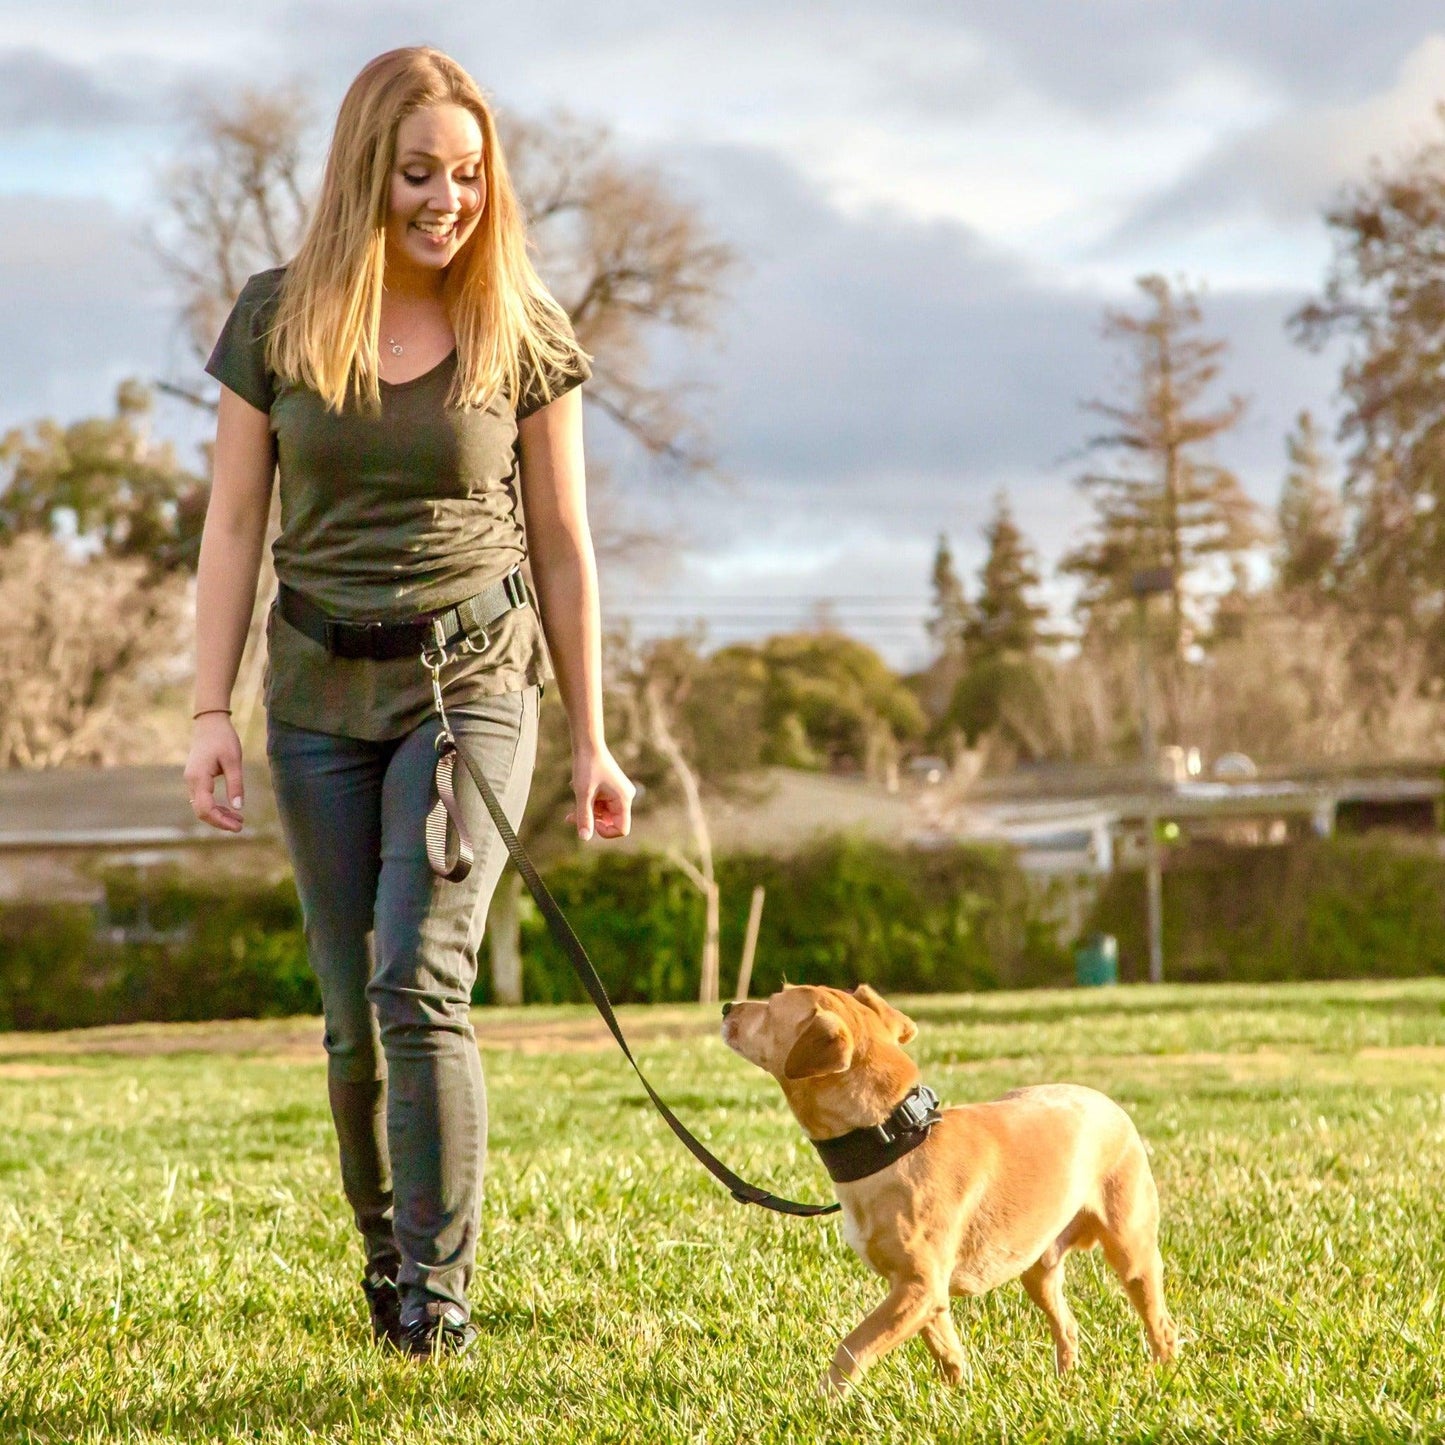 photo of a girl walking a dog hands-free at a park